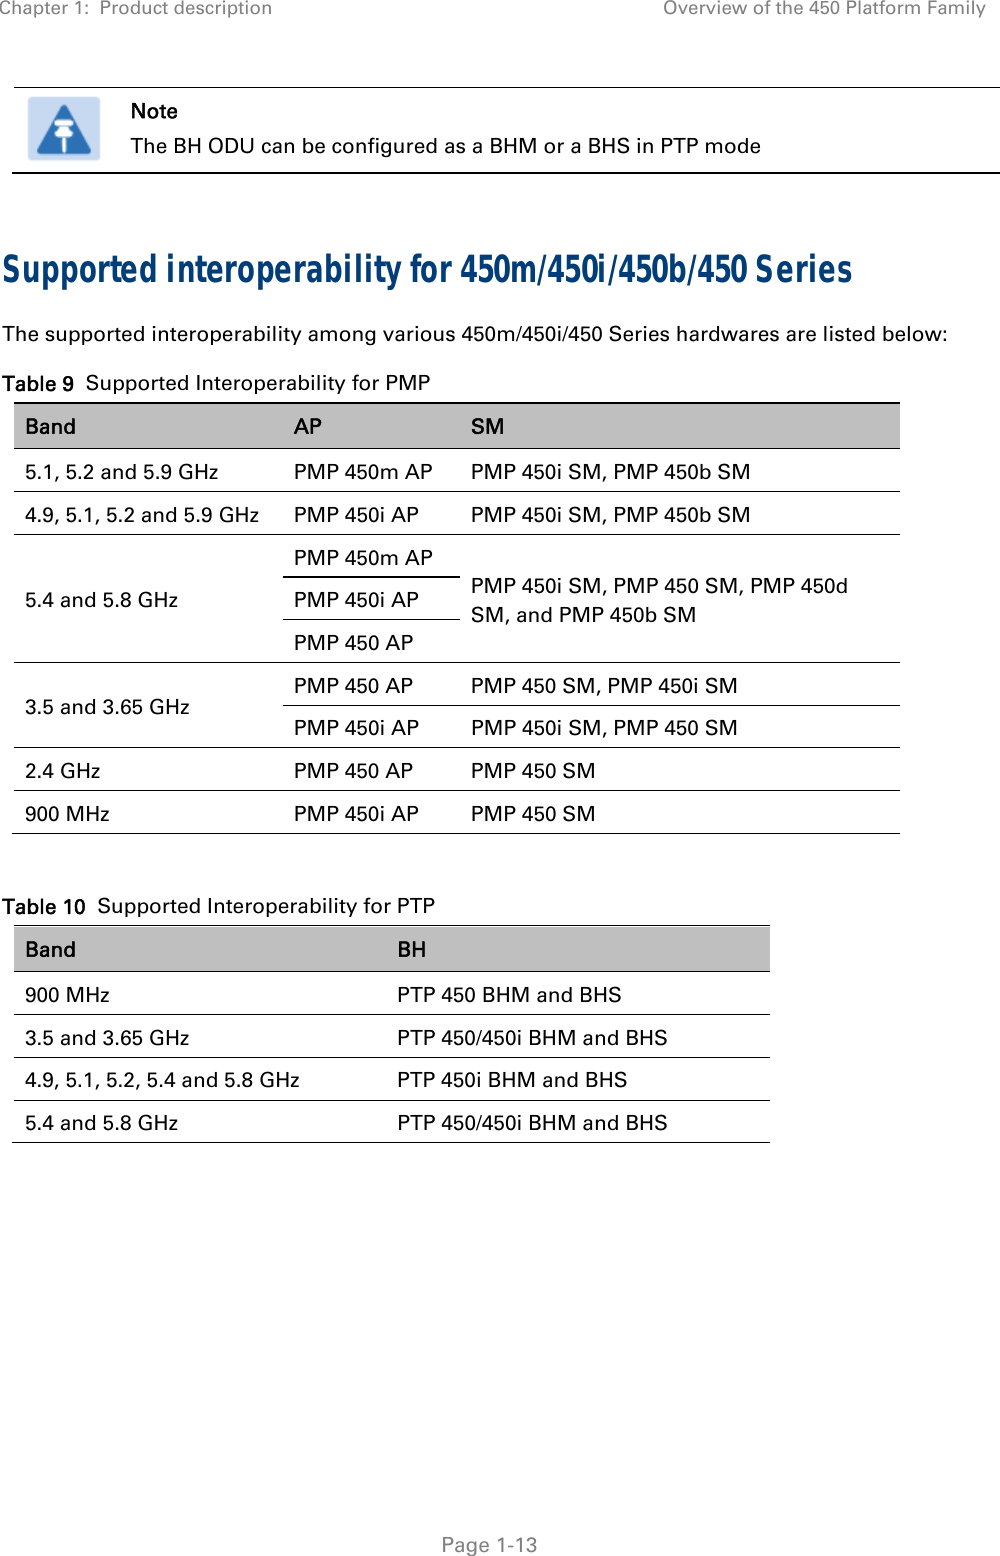 Chapter 1:  Product description  Overview of the 450 Platform Family   Page 1-13  Note The BH ODU can be configured as a BHM or a BHS in PTP mode  Supported interoperability for 450m/450i/450b/450 Series  The supported interoperability among various 450m/450i/450 Series hardwares are listed below: Table 9  Supported Interoperability for PMP Band  AP   SM 5.1, 5.2 and 5.9 GHz  PMP 450m AP  PMP 450i SM, PMP 450b SM  4.9, 5.1, 5.2 and 5.9 GHz  PMP 450i AP  PMP 450i SM, PMP 450b SM  5.4 and 5.8 GHz PMP 450m AP PMP 450i SM, PMP 450 SM, PMP 450d SM, and PMP 450b SM  PMP 450i AP PMP 450 AP 3.5 and 3.65 GHz  PMP 450 AP  PMP 450 SM, PMP 450i SM PMP 450i AP  PMP 450i SM, PMP 450 SM 2.4 GHz  PMP 450 AP  PMP 450 SM 900 MHz  PMP 450i AP  PMP 450 SM  Table 10  Supported Interoperability for PTP Band  BH 900 MHz  PTP 450 BHM and BHS 3.5 and 3.65 GHz  PTP 450/450i BHM and BHS 4.9, 5.1, 5.2, 5.4 and 5.8 GHz  PTP 450i BHM and BHS 5.4 and 5.8 GHz  PTP 450/450i BHM and BHS     